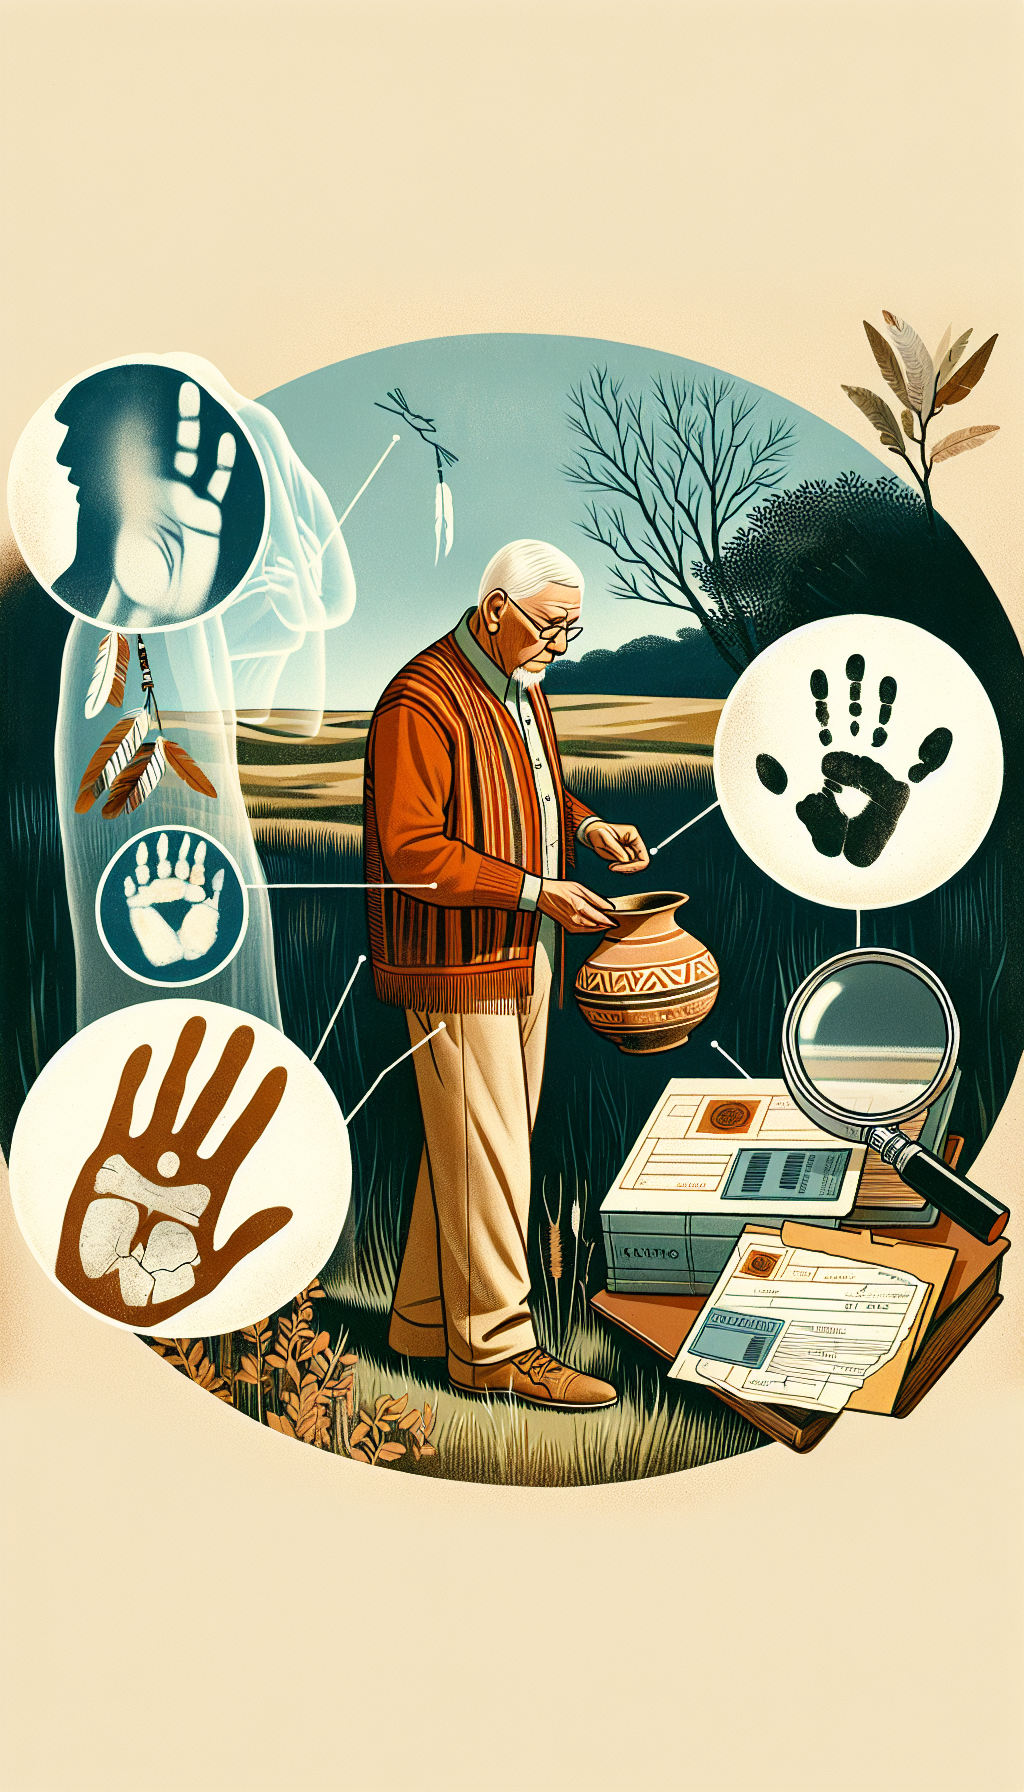 Amidst a rustic backdrop, a solemn figure of a Native American elder gently holds an ancient artifact, a delicate pottery shard, while overlaying translucent symbols of respect—handprints and feathers—merge with scientific tools like a magnifying glass and archival tags, symbolizing the convergence of preservation, respect, and careful identification of cultural treasures.